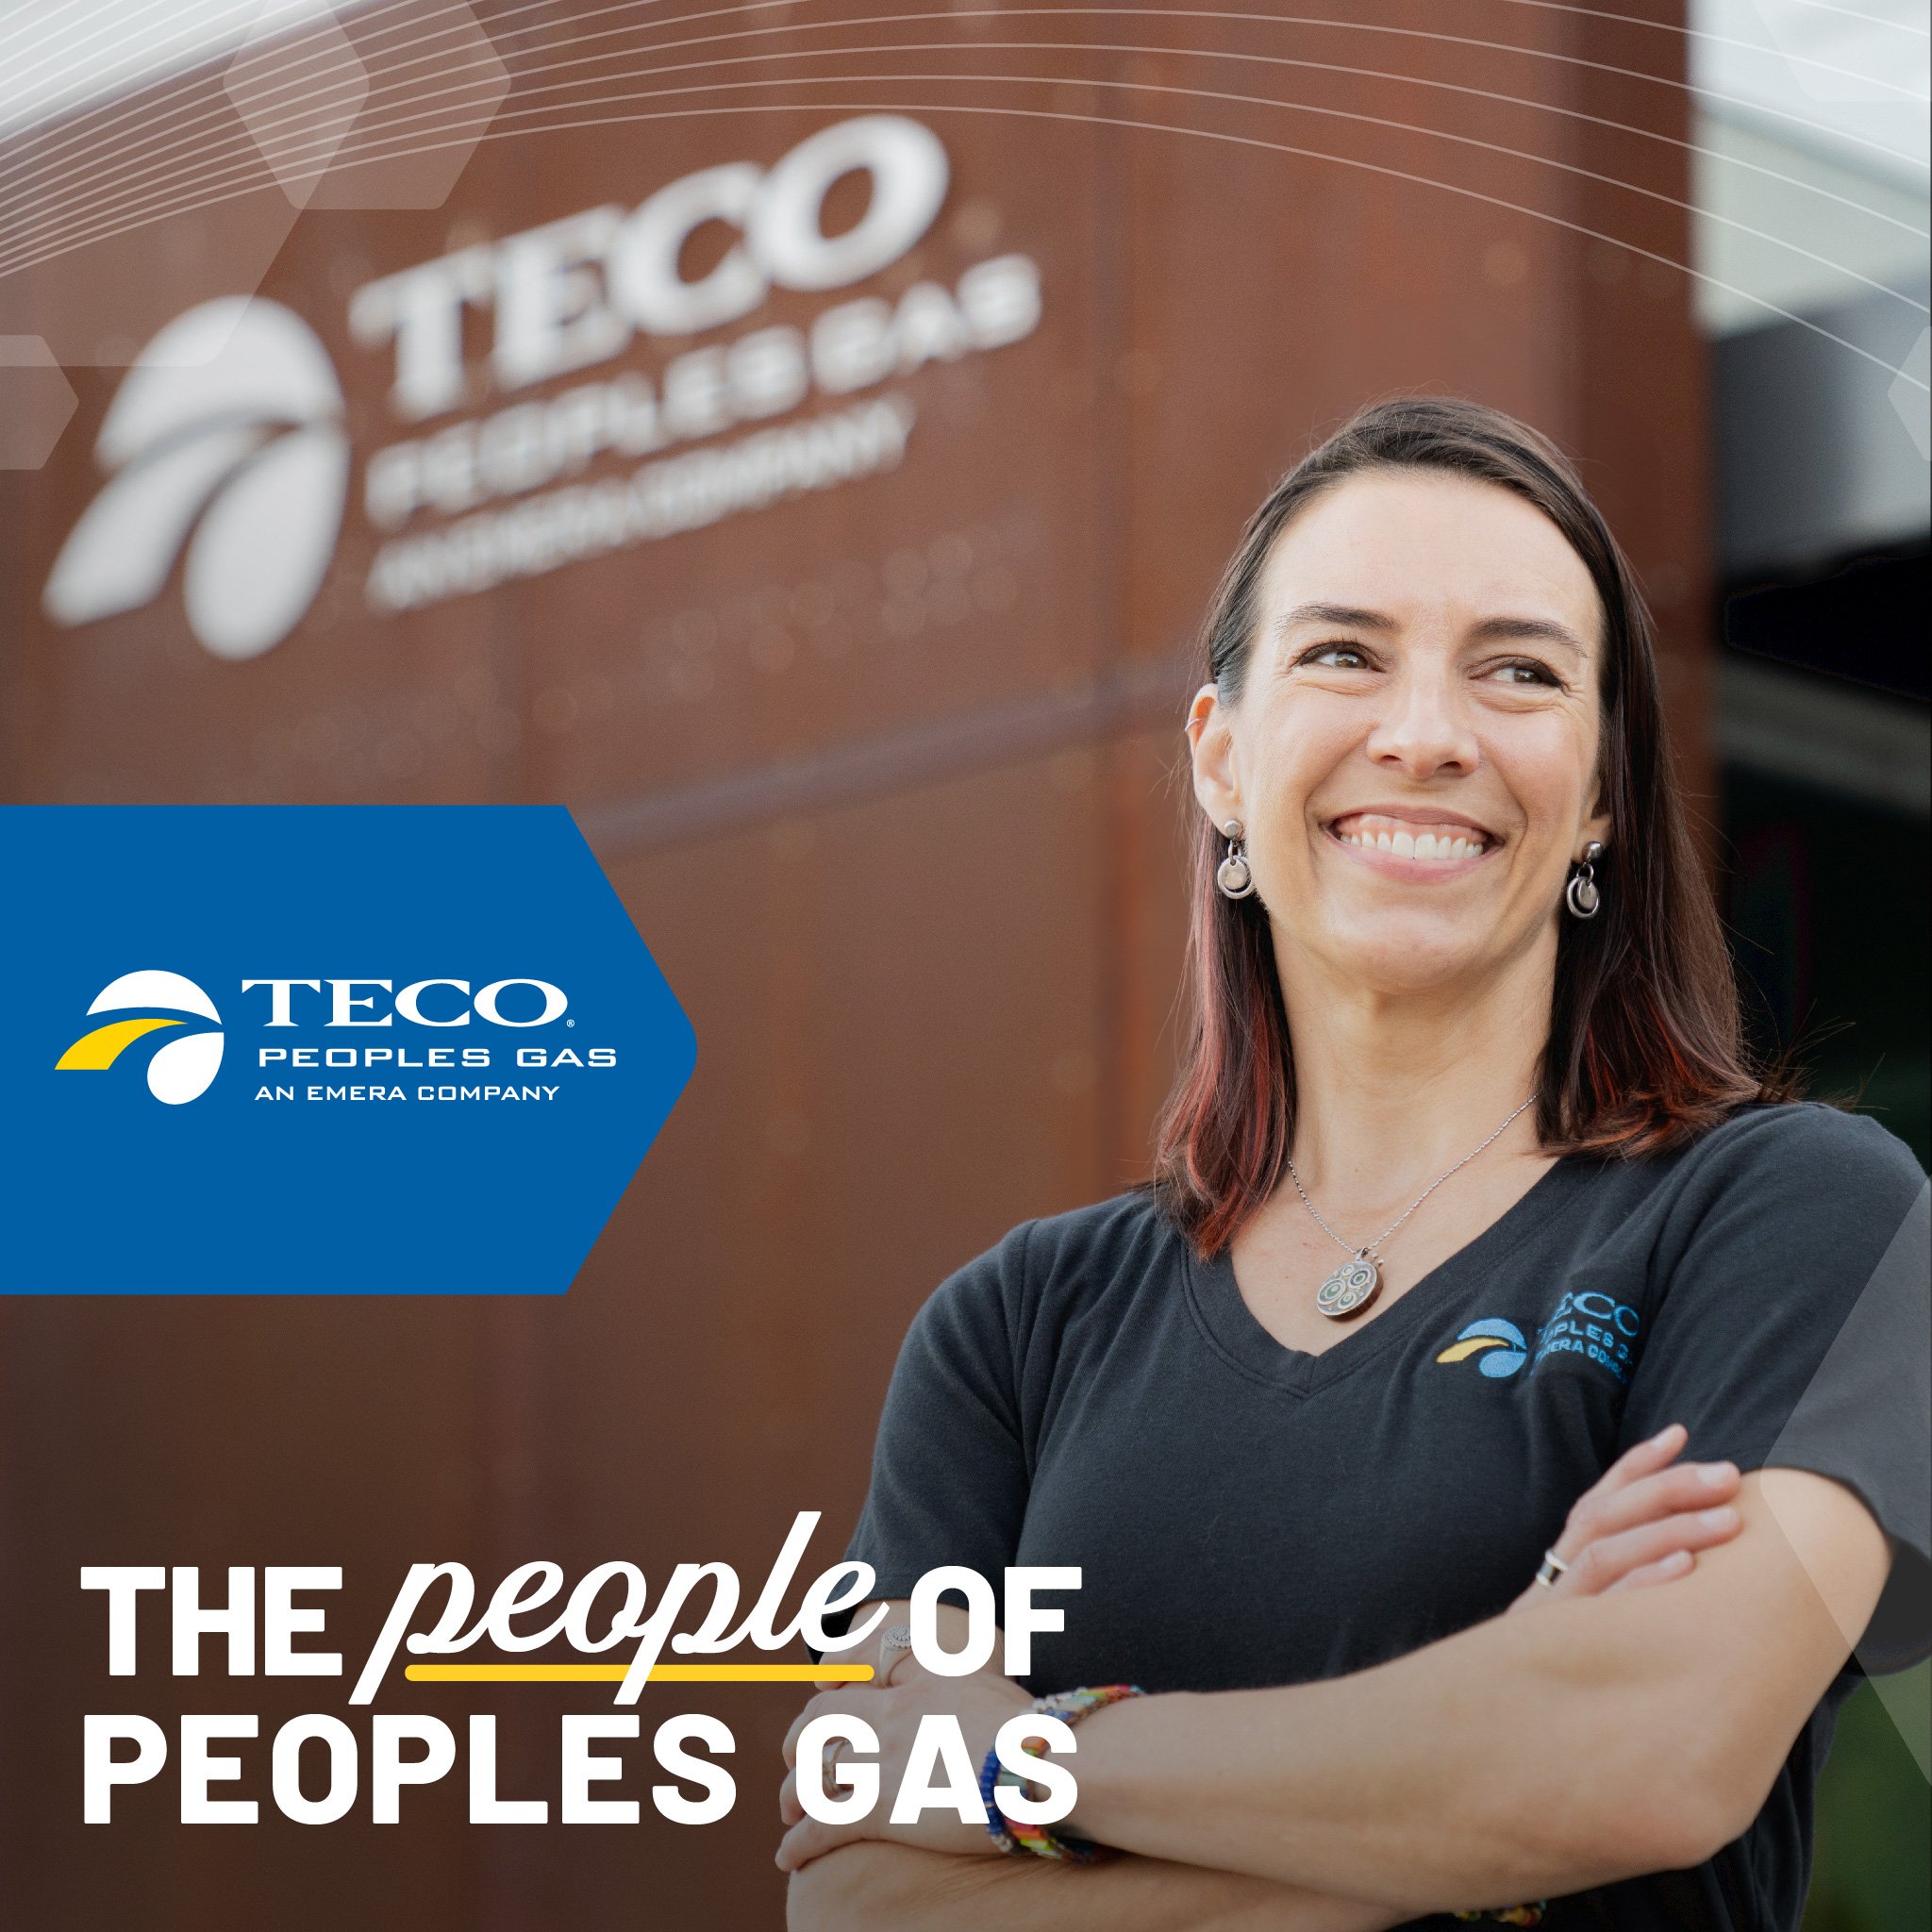 The people of Peoples Gas: Shana Rini